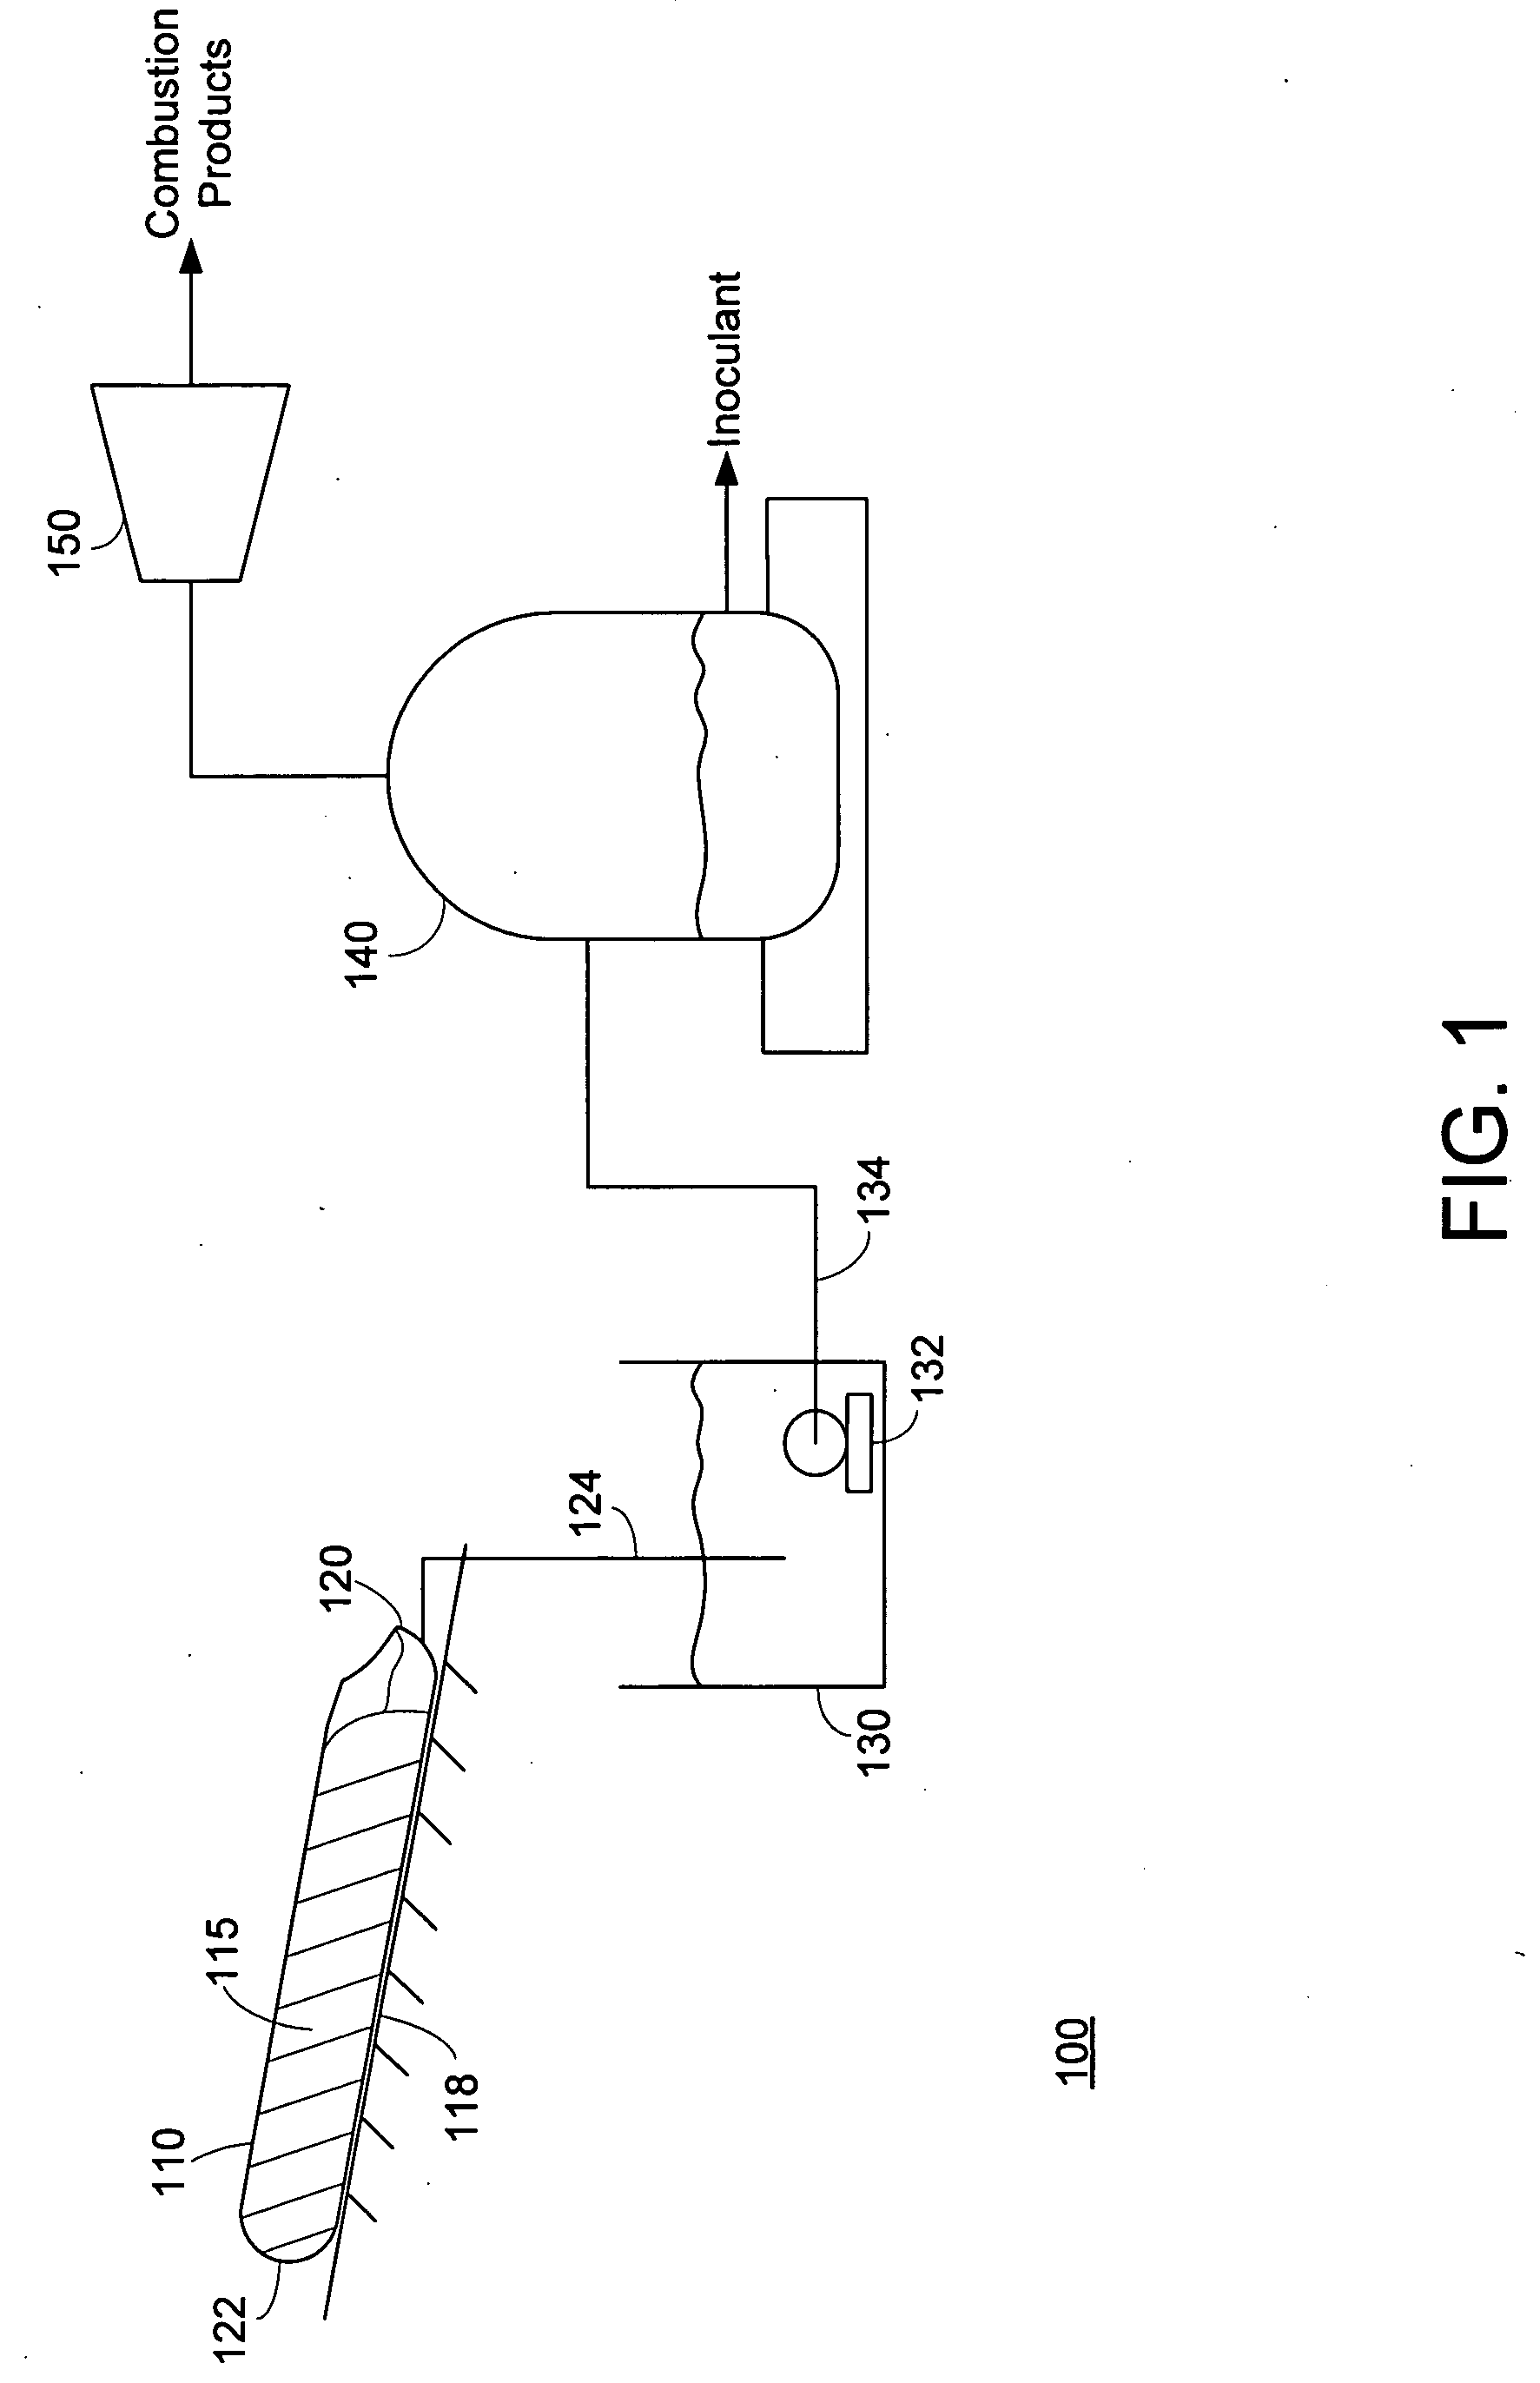 Organic waste material treatment system